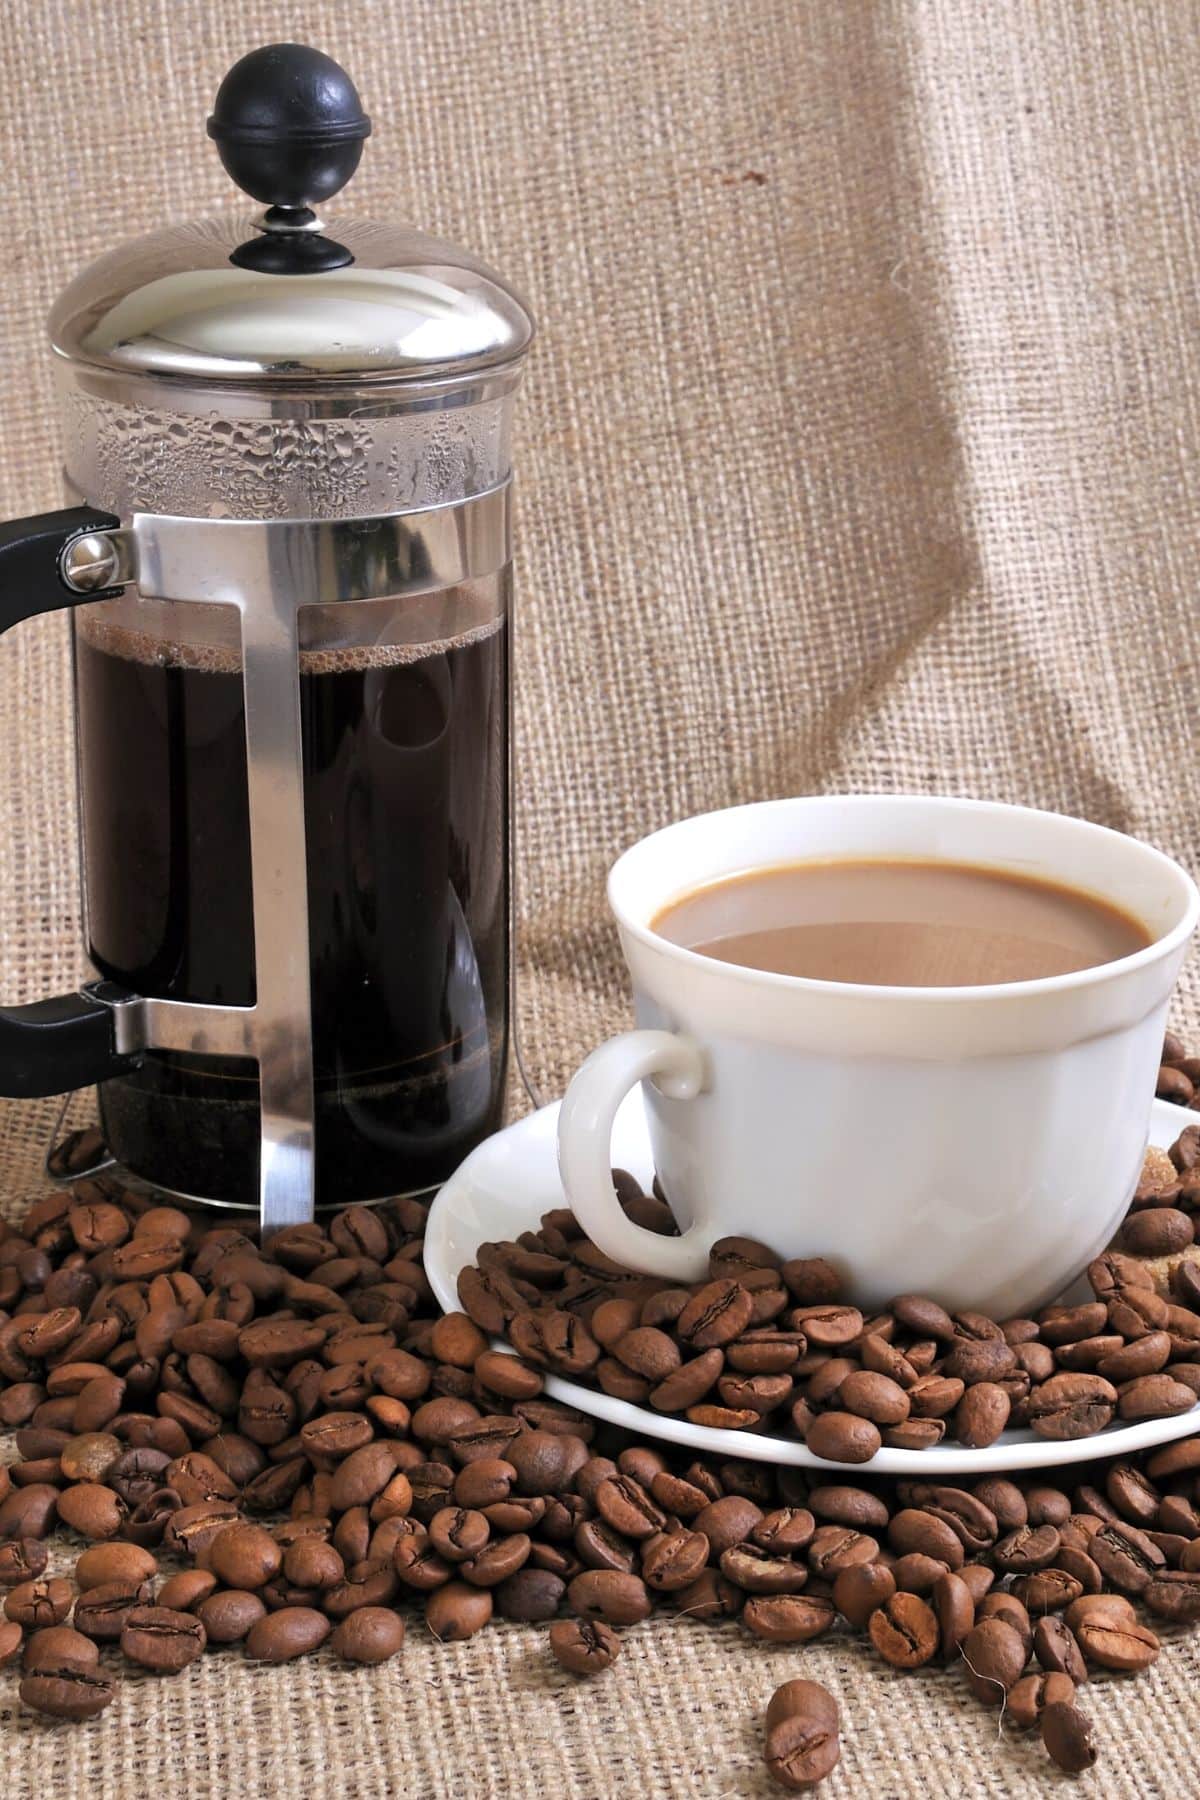 https://www.cleaneatingkitchen.com/wp-content/uploads/2022/10/french-press-coffee-hero-vertical.jpg